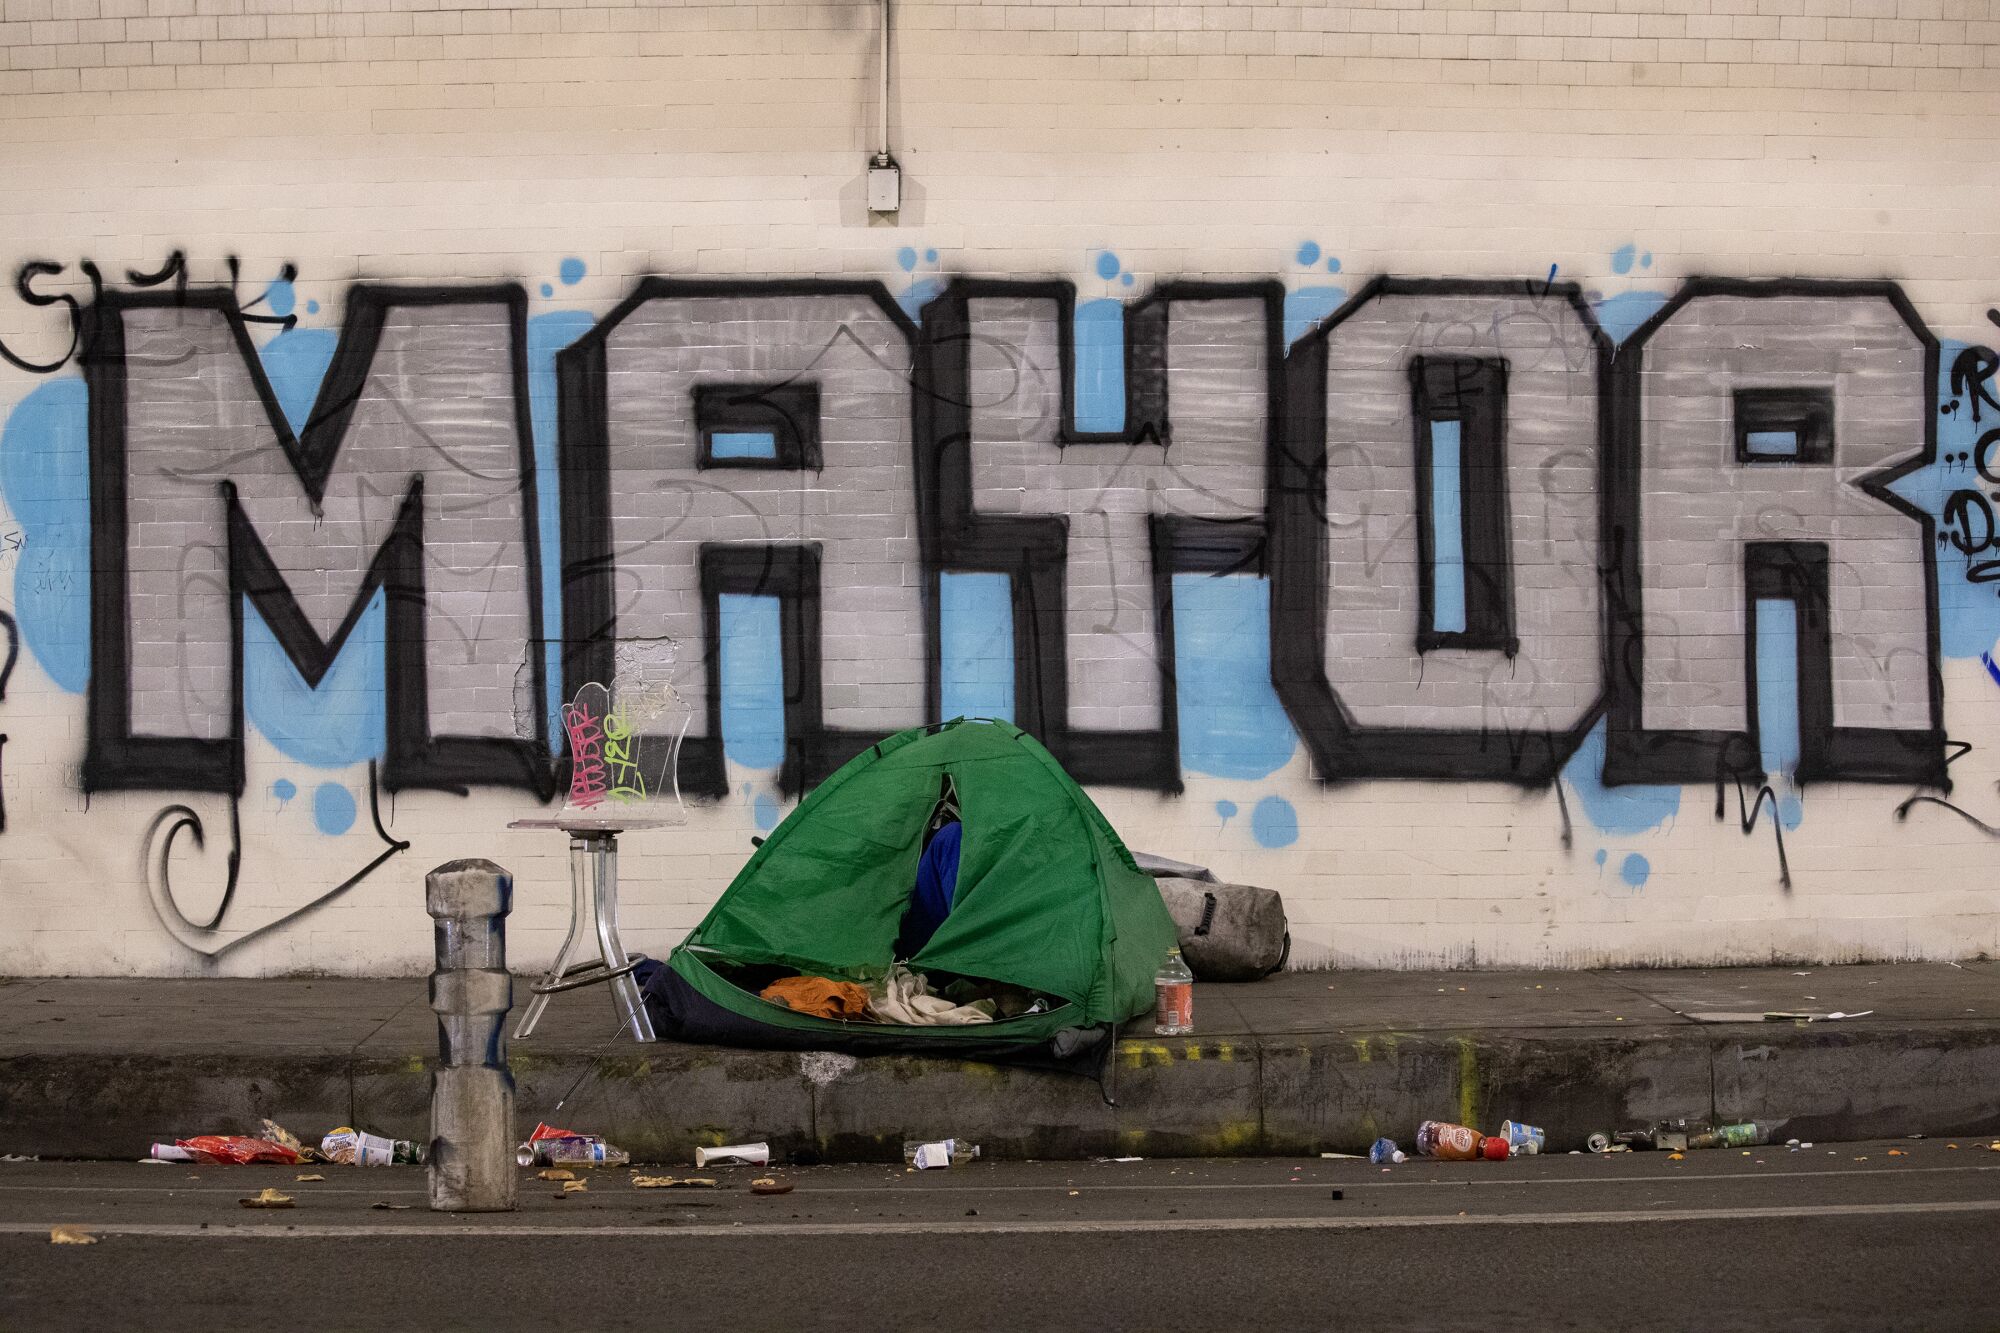 A homeless person sleeps in a tent on the sidewalk under graffiti that says "Mayor"